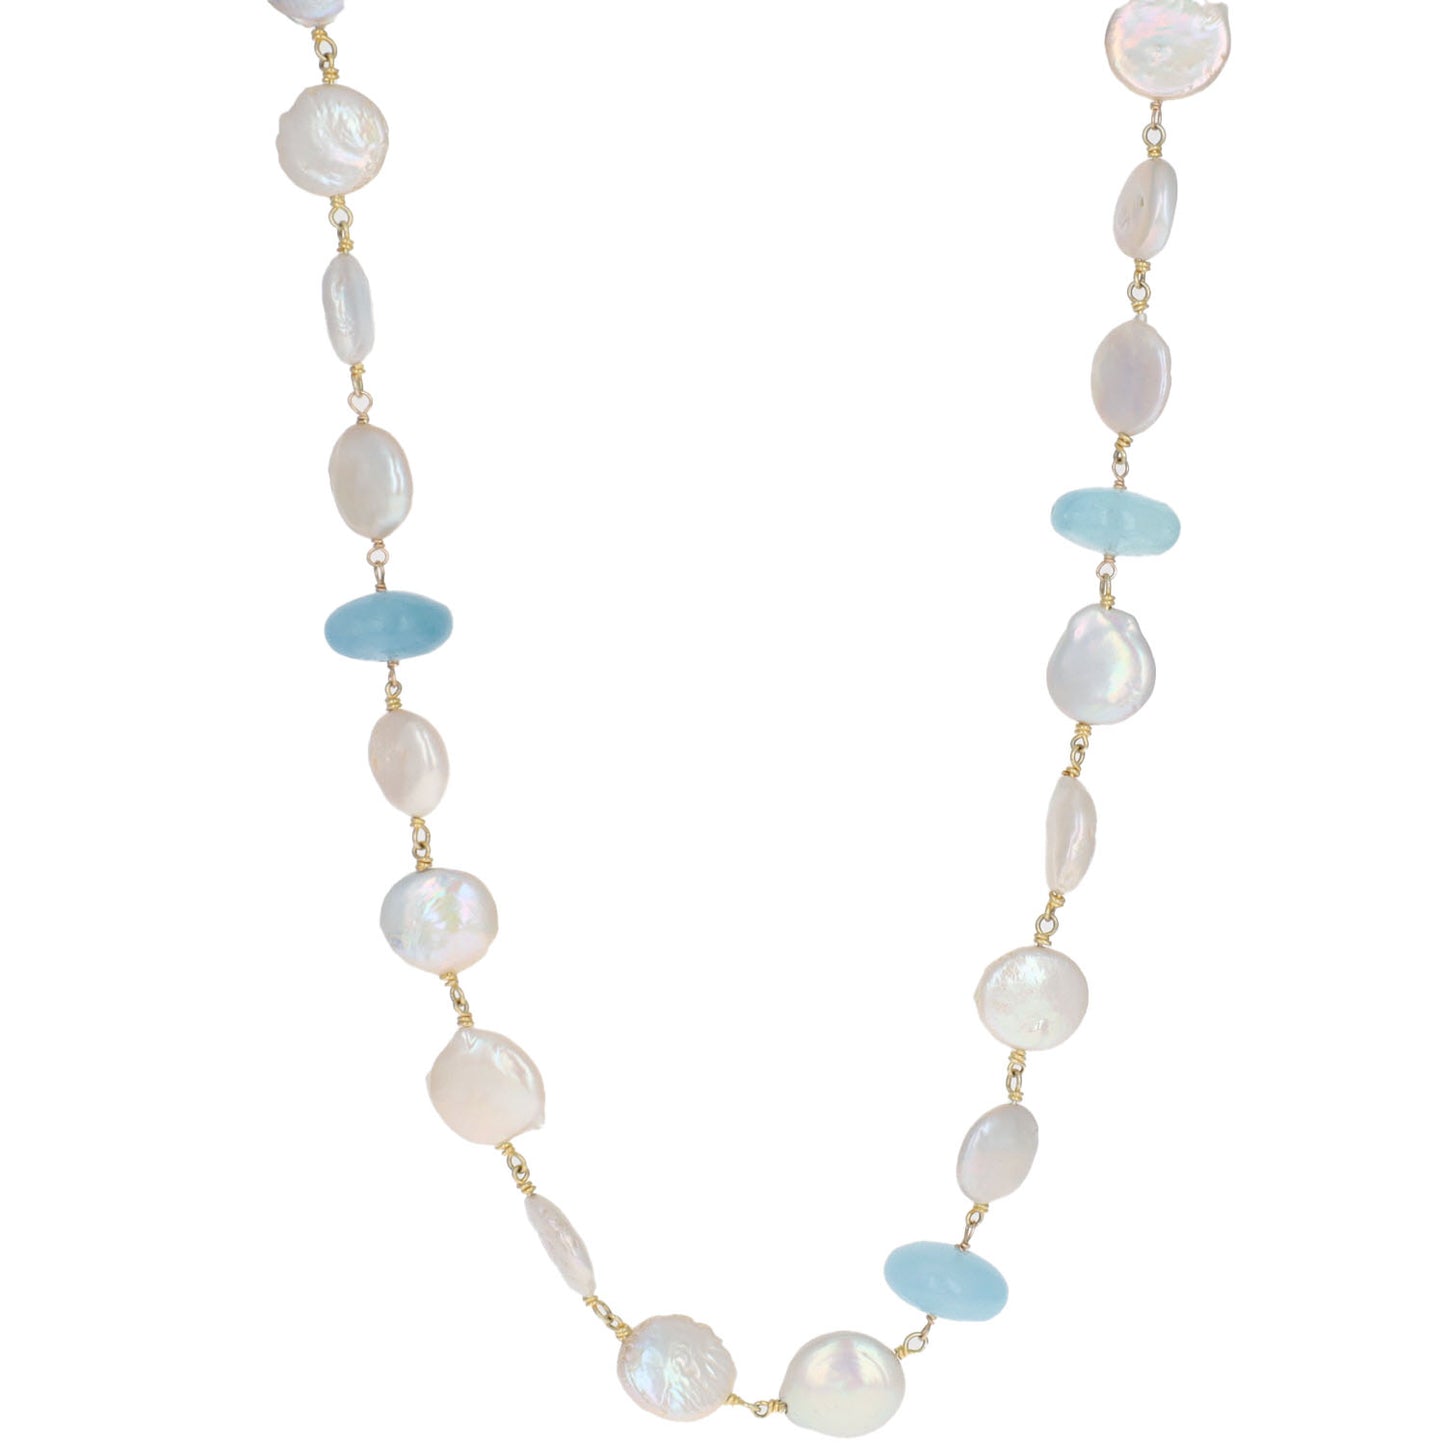 Coin Pearl and Aqua Marine Necklace